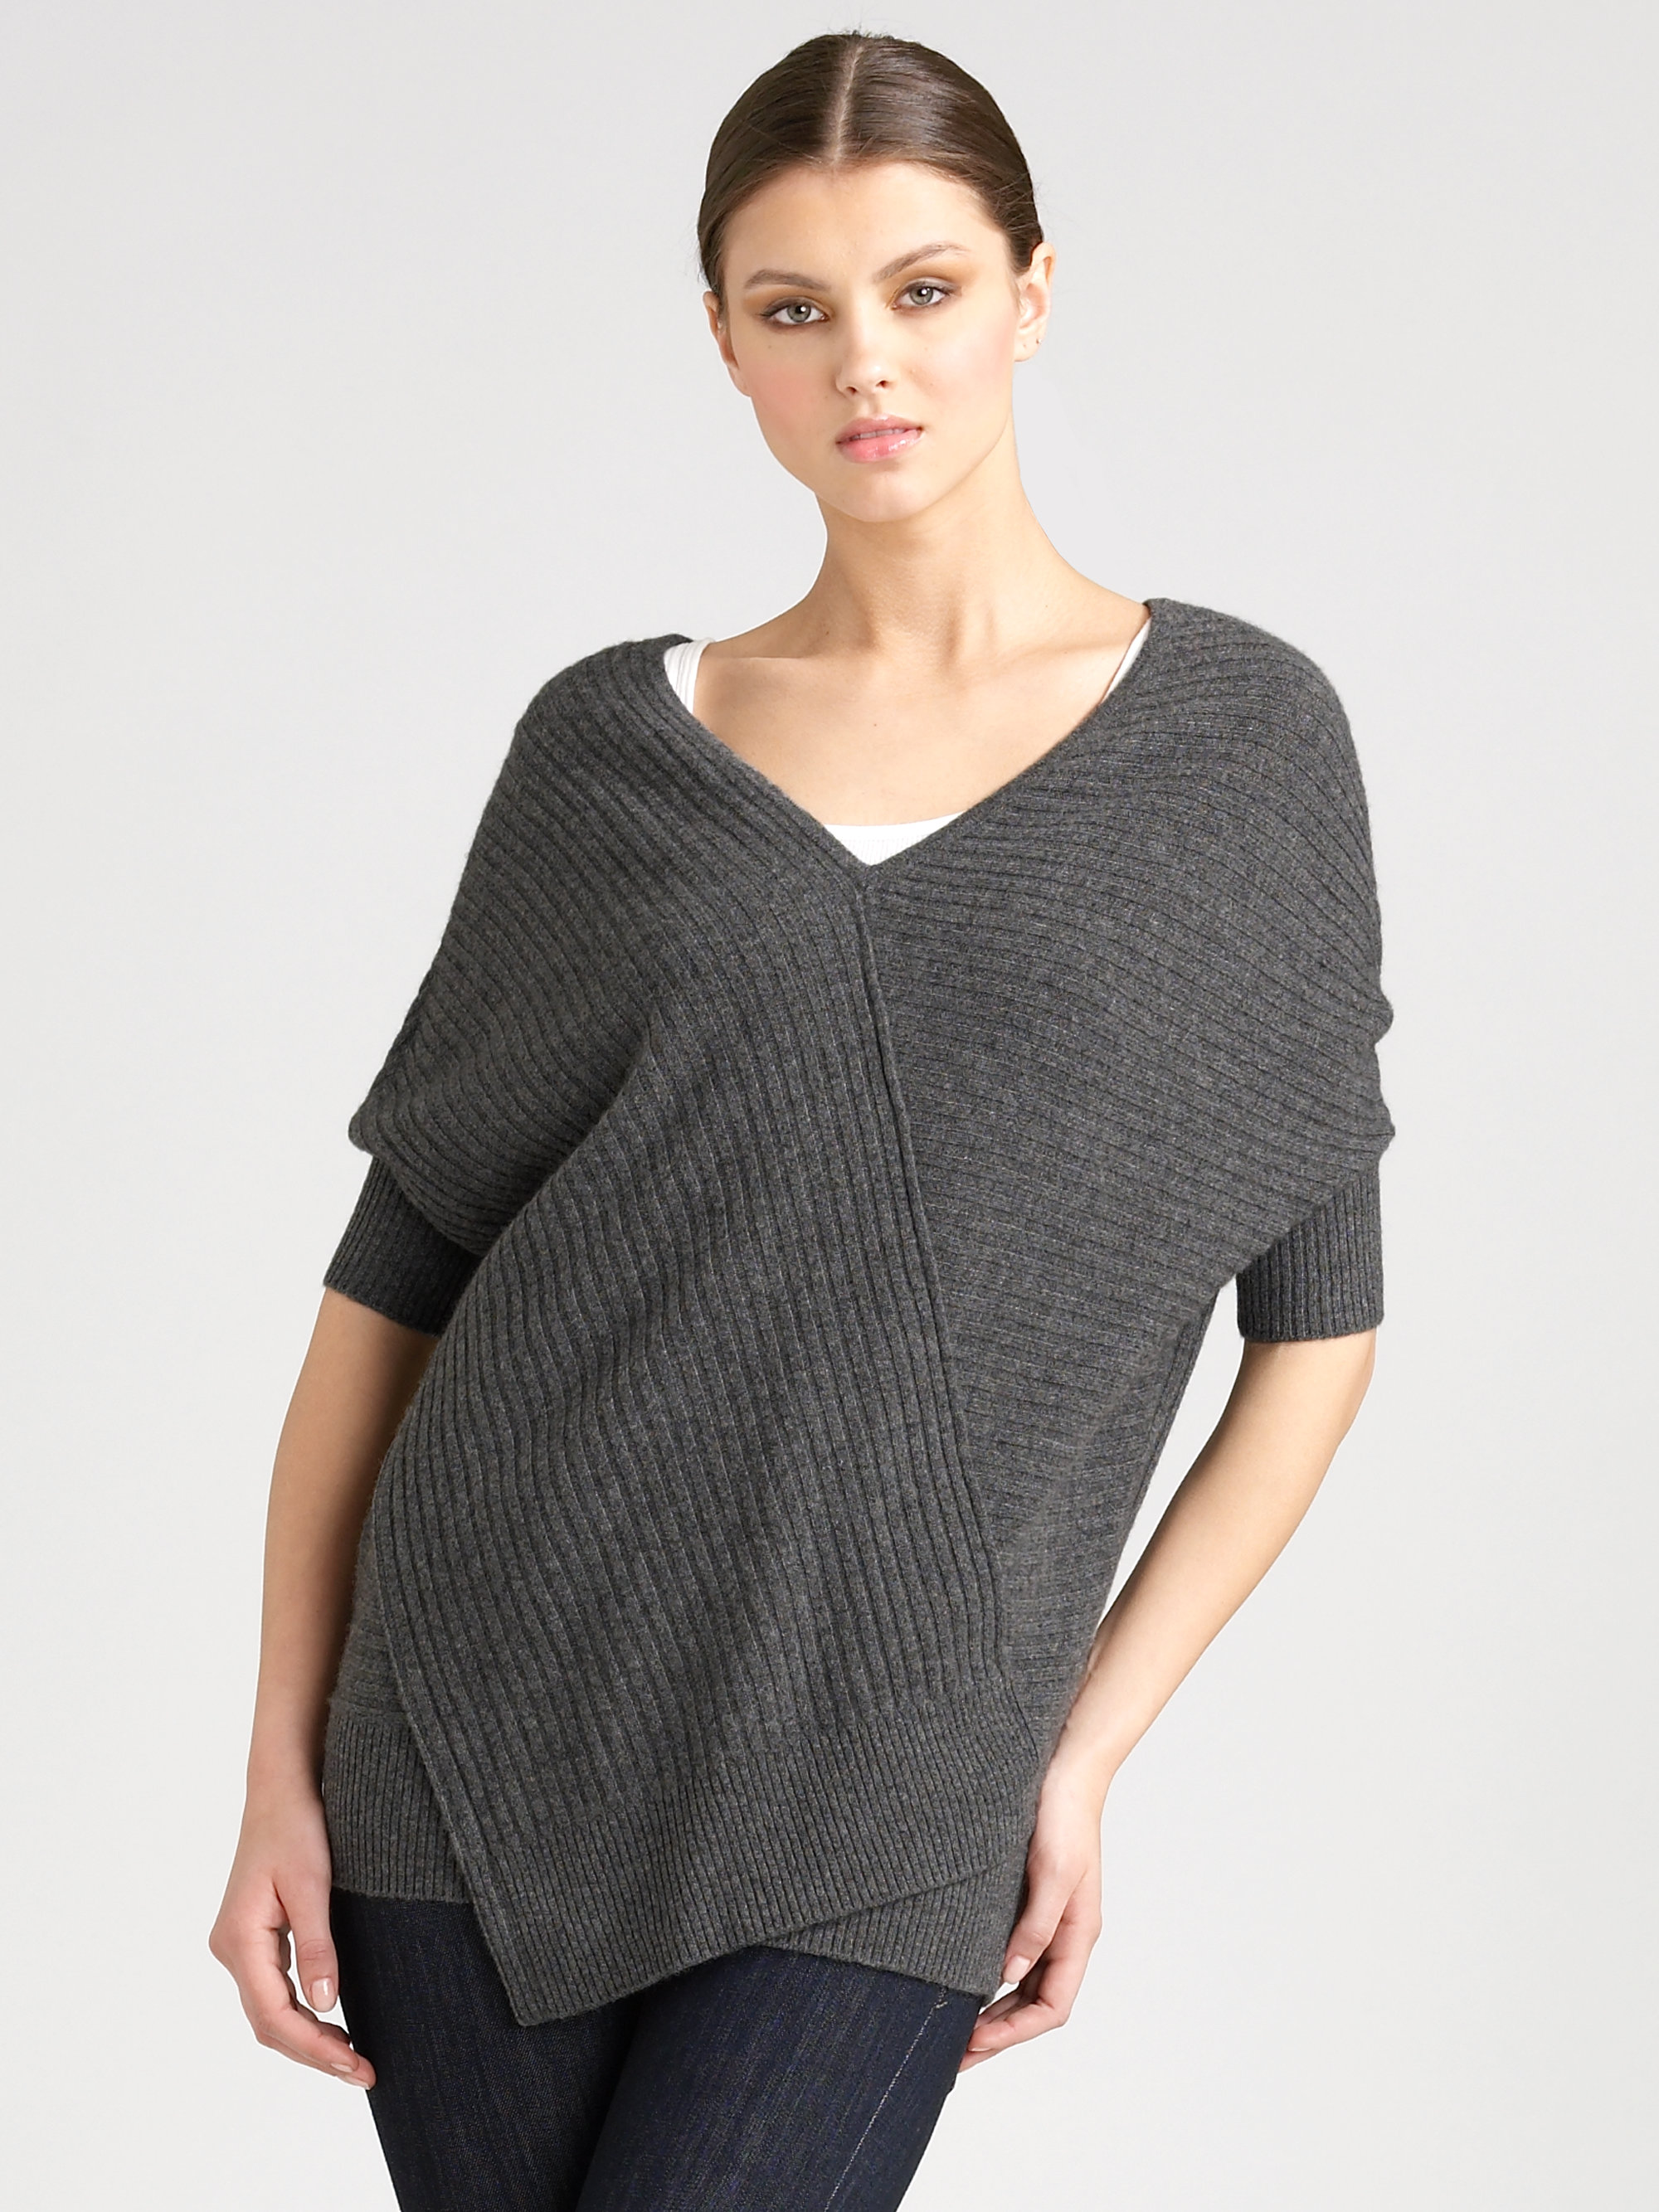 Lyst - Vince Cashmere Cocoon Sweater in Gray